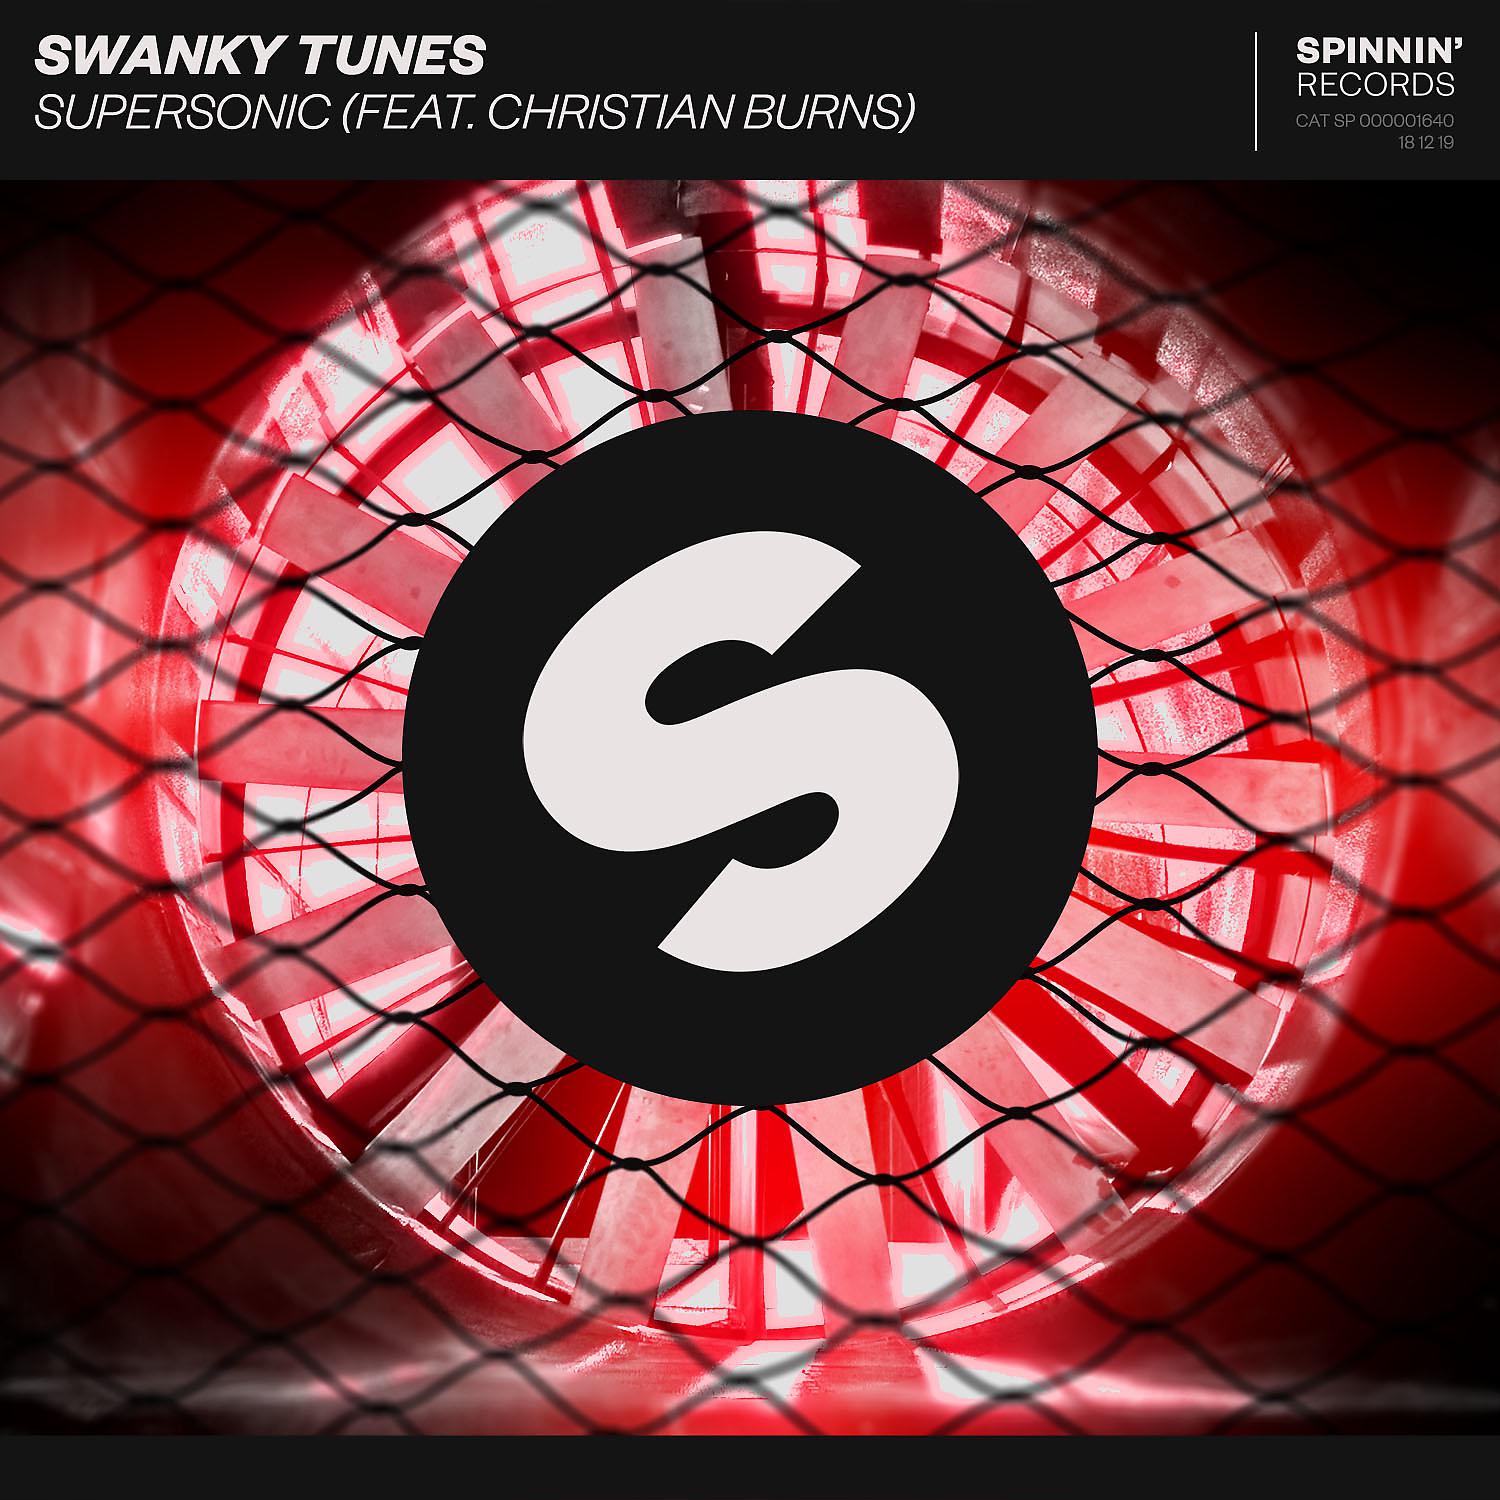 Tunes feat. Swanky Tunes Supersonic. Spinnin records. Christian Burns.